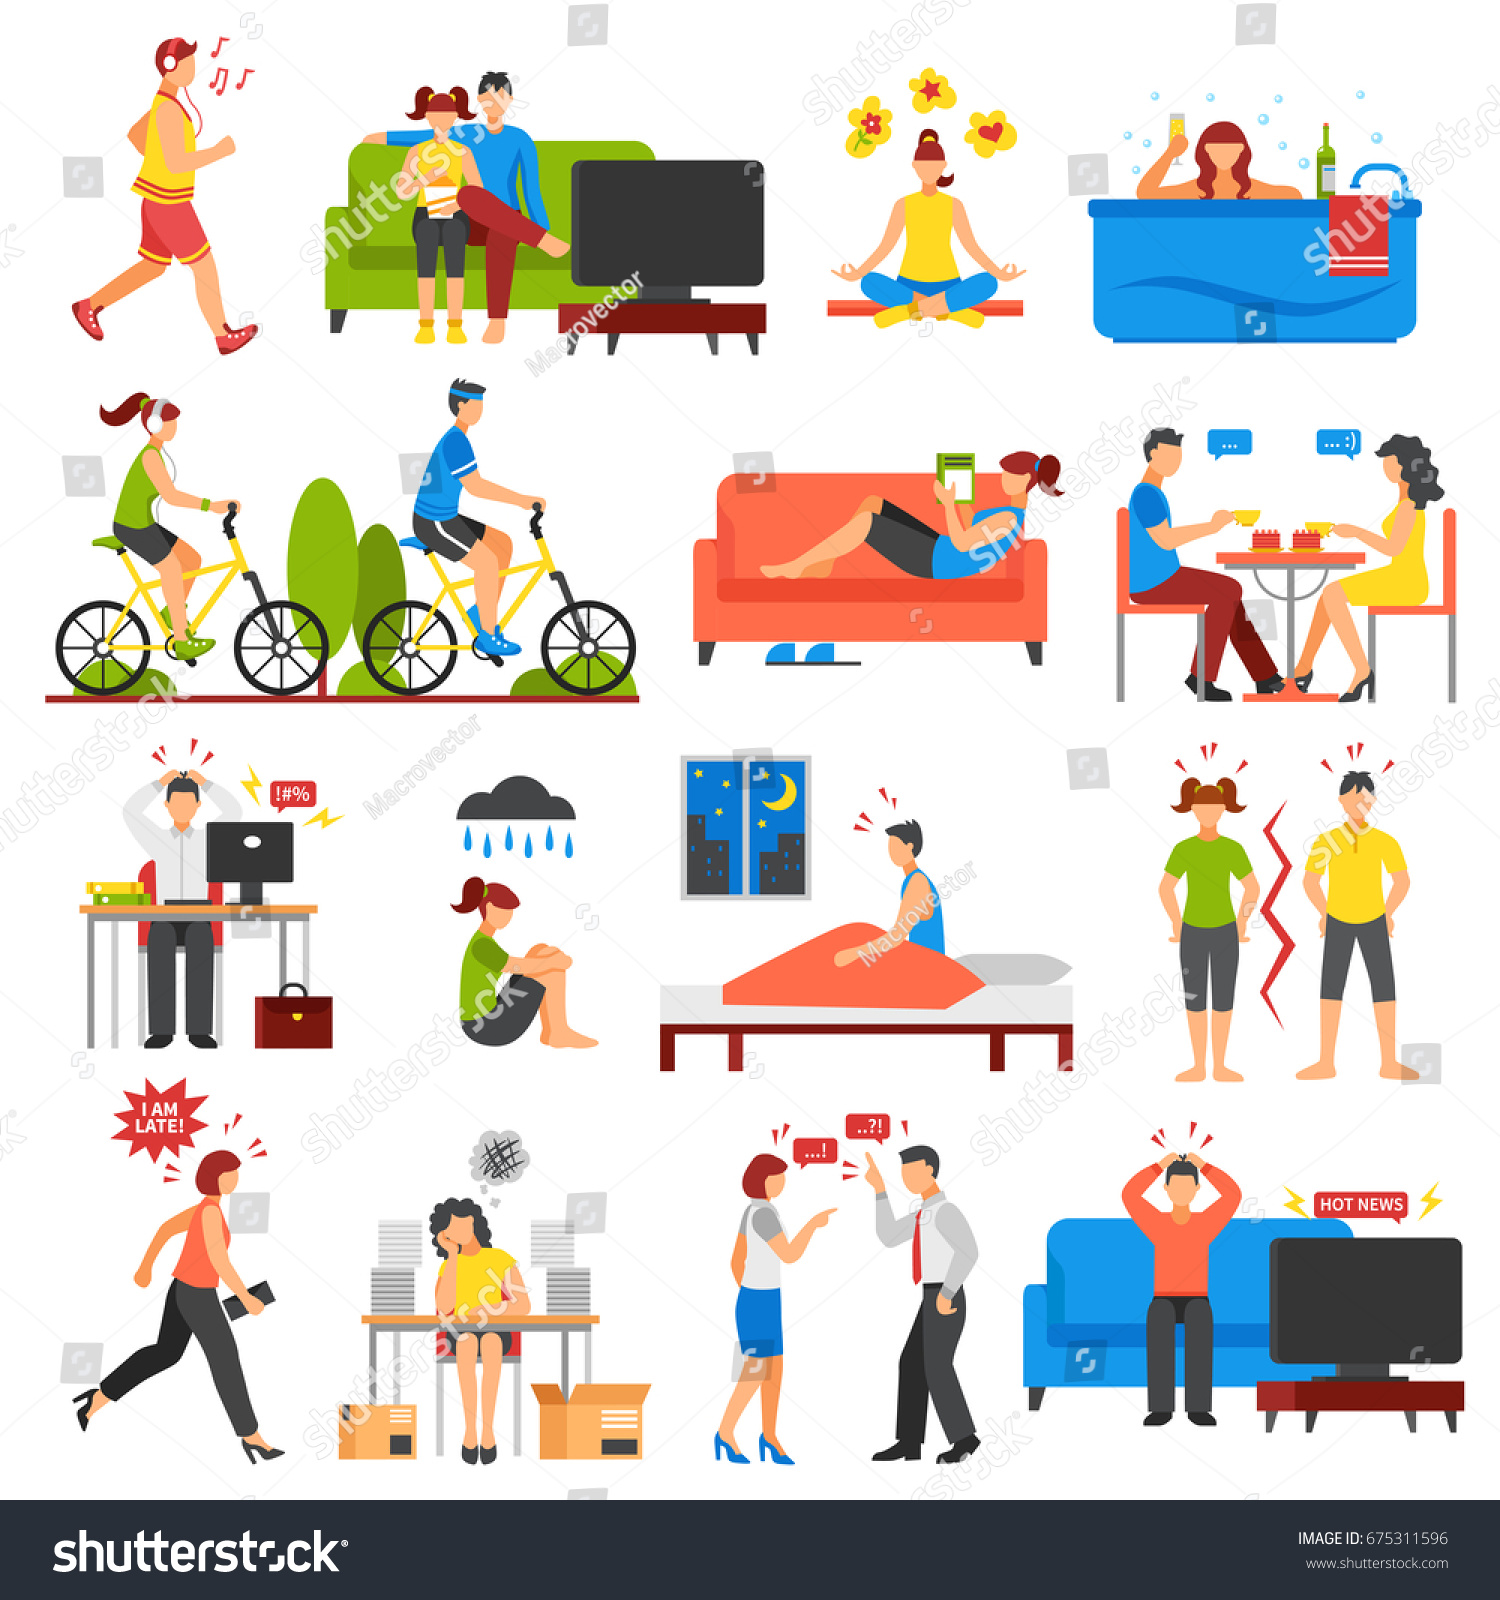 SVG of Isometric icons set of different ways of relaxation after stress and stressful working days isolated on white background vector illustration svg